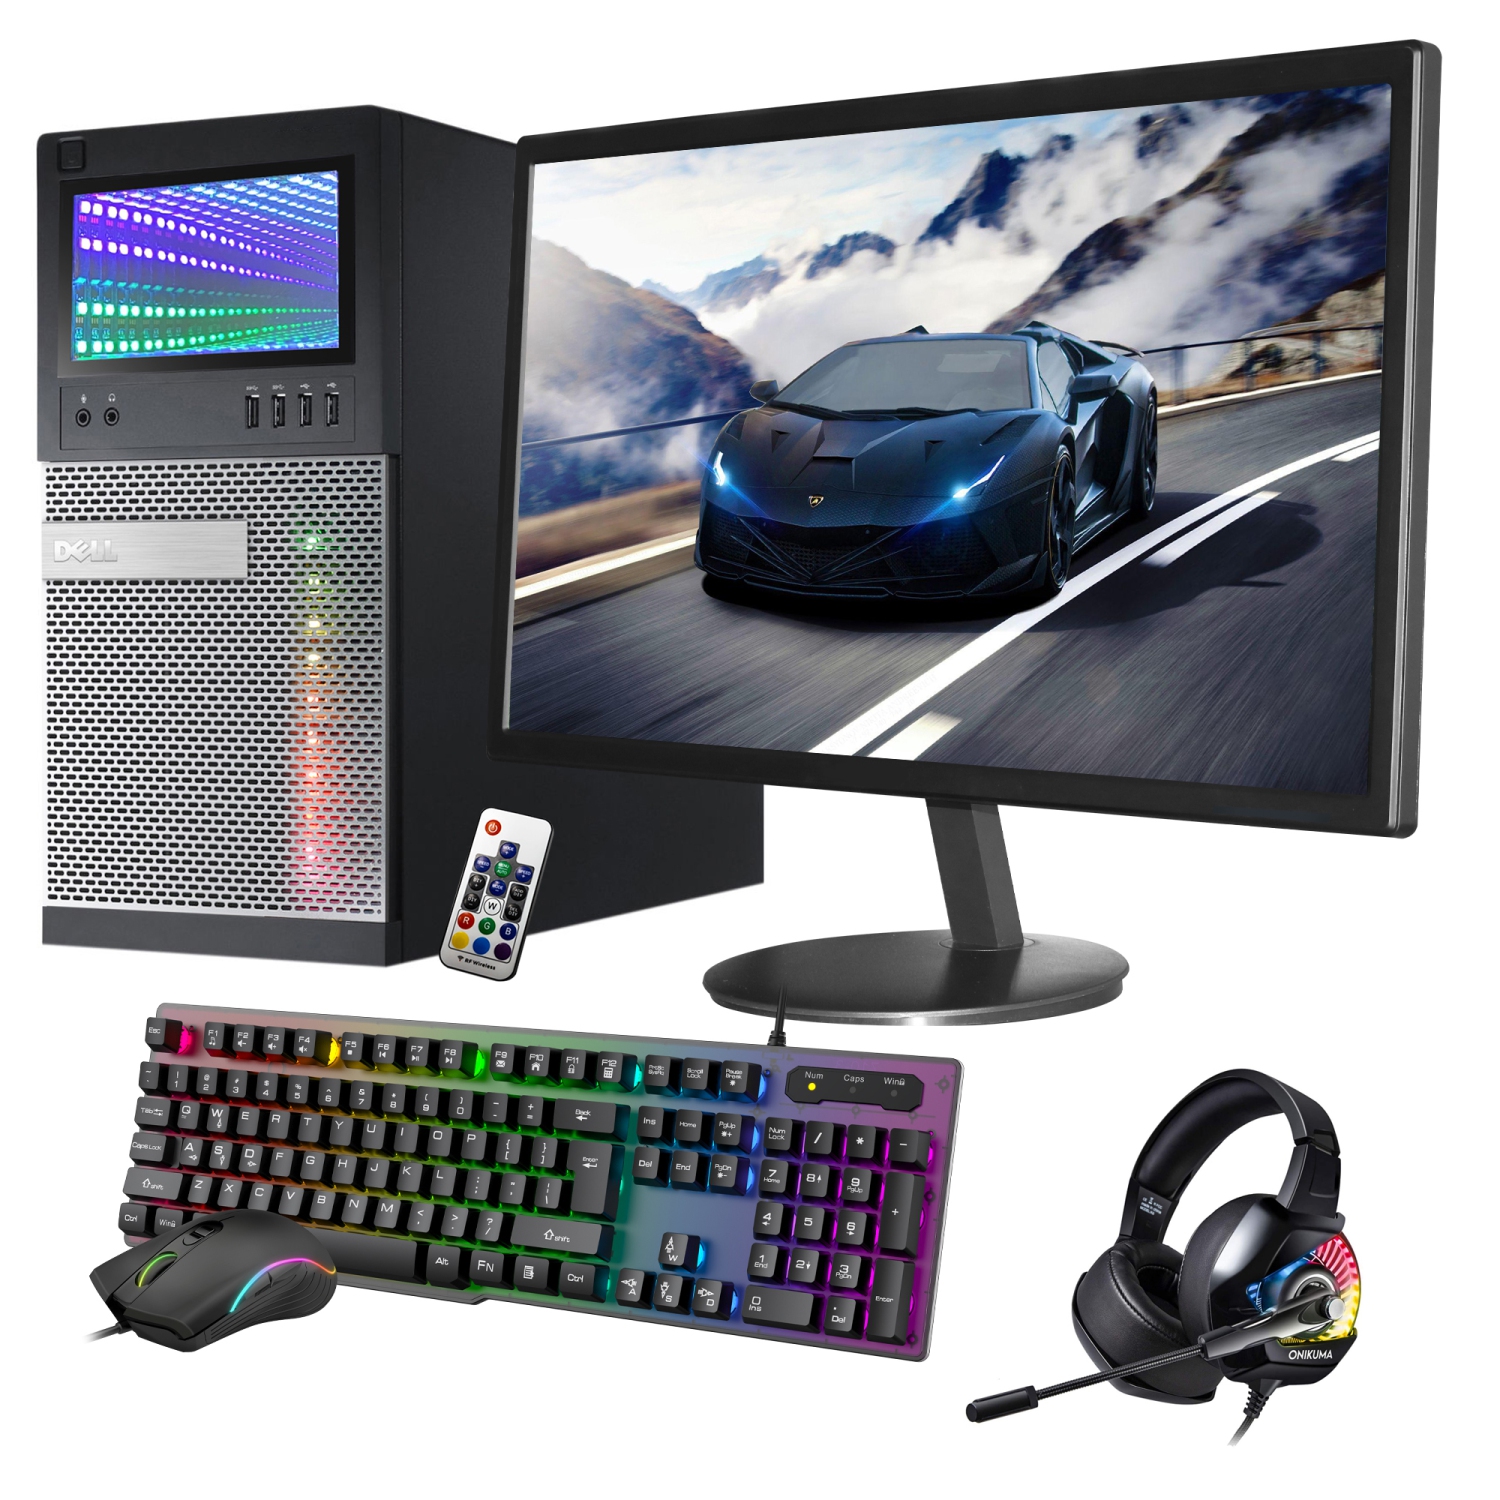 Refurbished (Good) - Gaming PC with 24" Monitor - Dell OptiPlex Computer Desktop i5 3.2GHz NVIDIA GT 1030 2GB 16GB DDR3 RAM 512GB SSD 1TB HDD Win 10 Pro LED Headset KB Mouse Combo